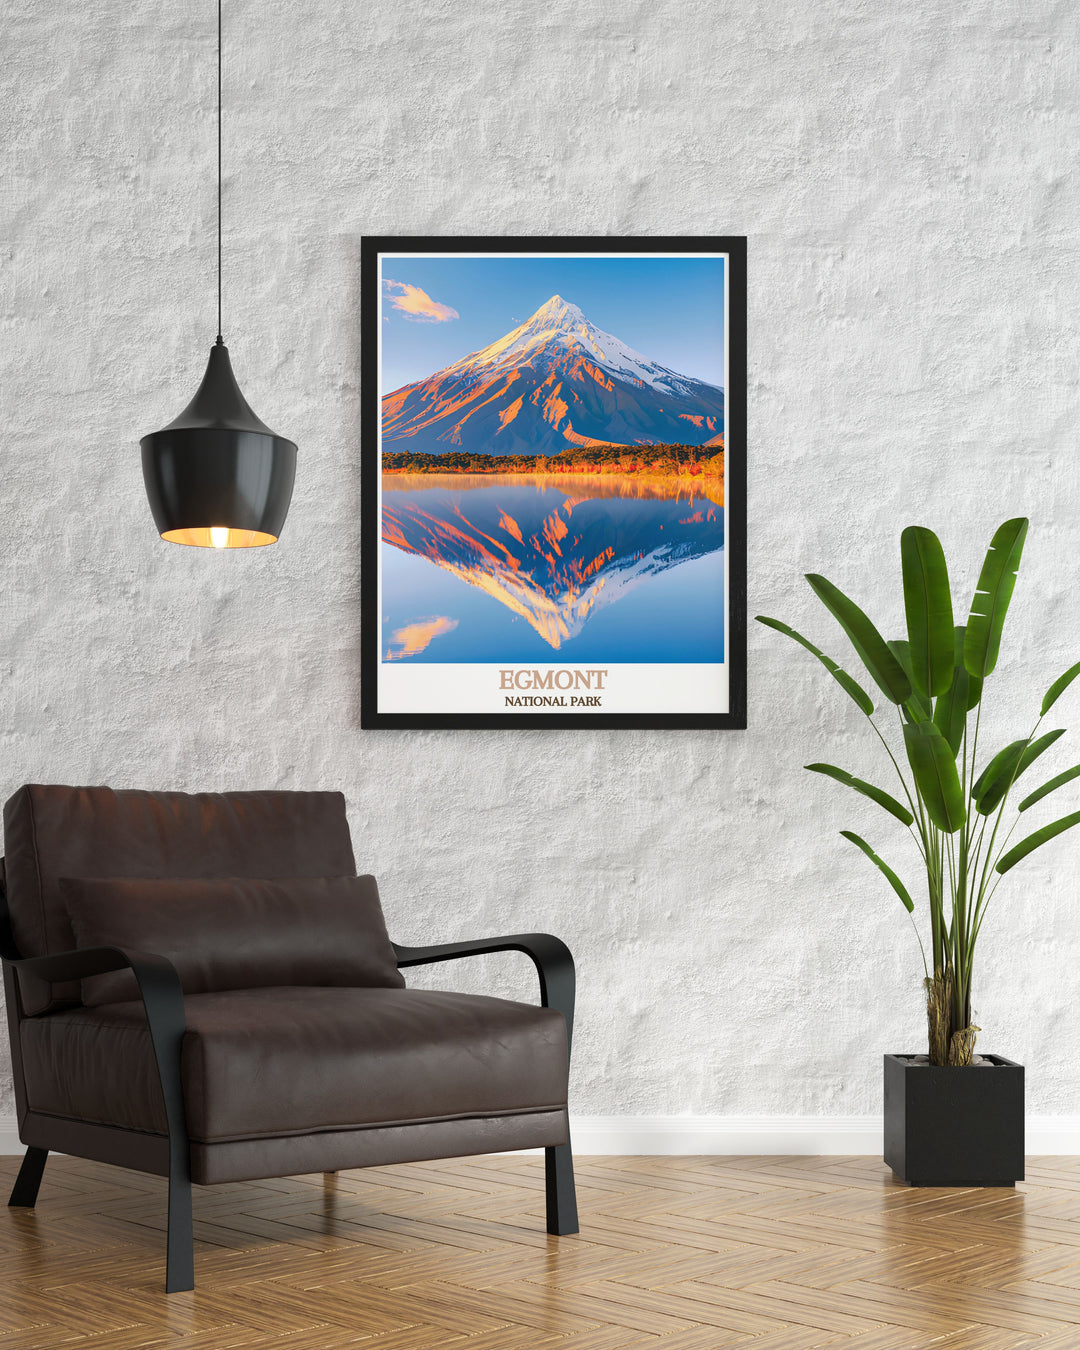 Custom print of Egmont National Park, offering a unique perspective of its diverse ecosystems and natural wonders.